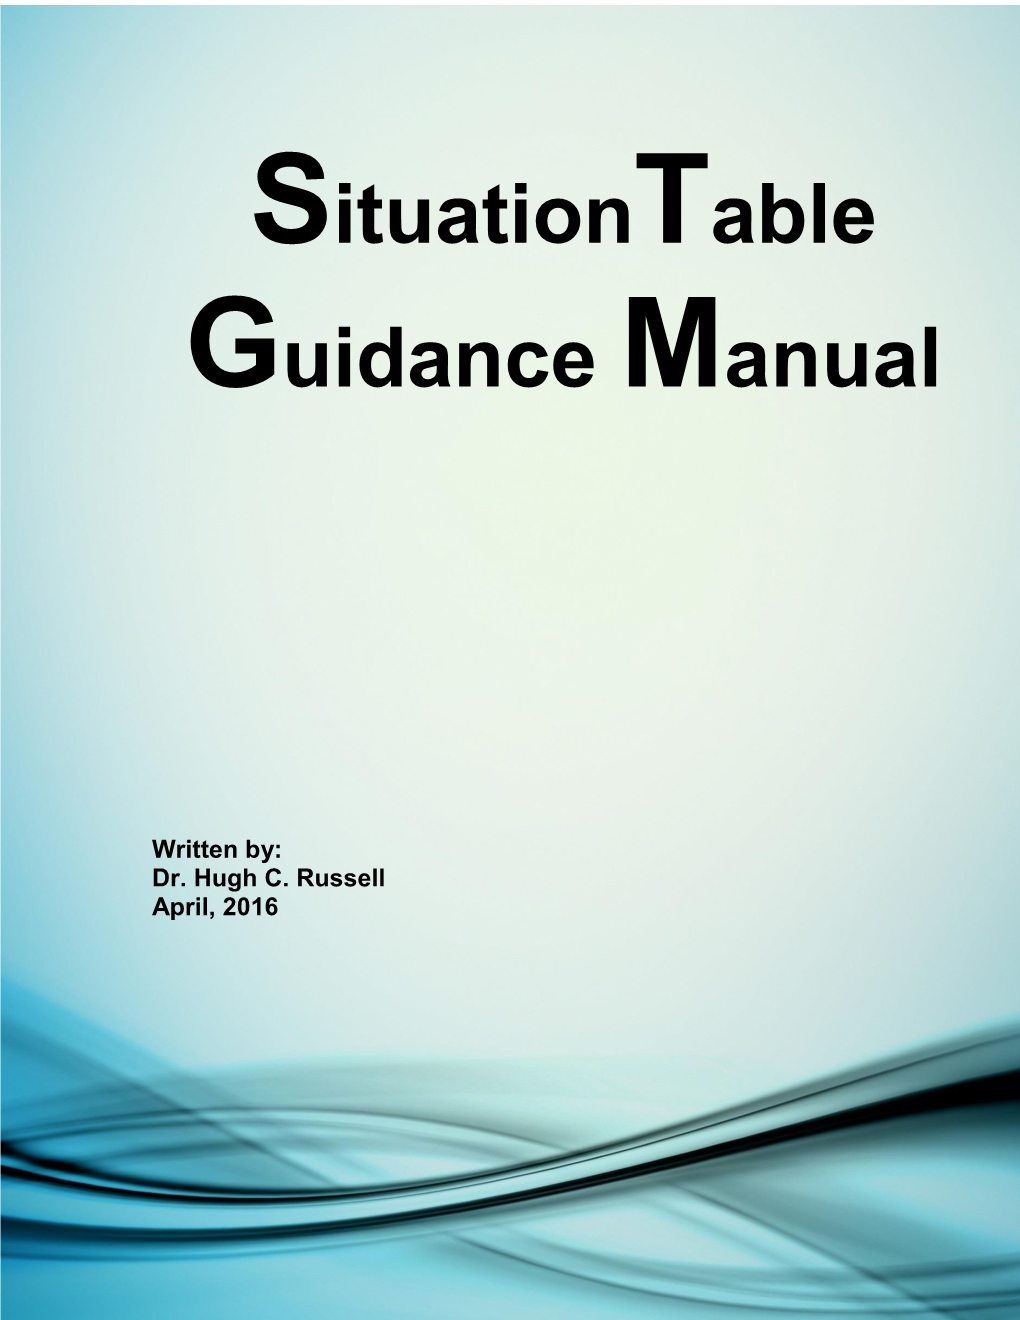 Situation Table Guidance Manual